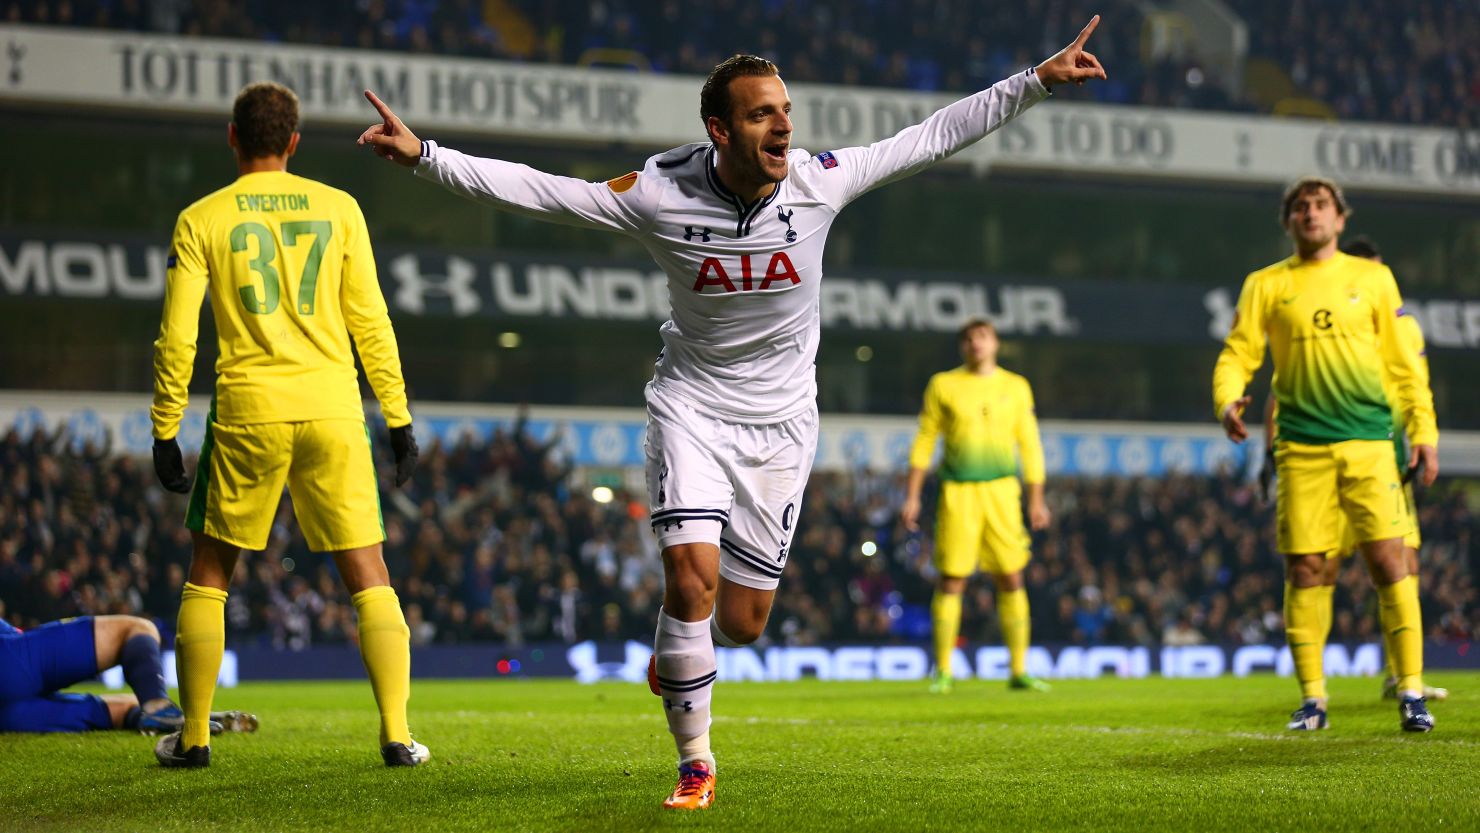 Spanish striker Roberto Soldado scored his first hat-trick for Tottenham Hotspur in the Europa League on Thursday. 